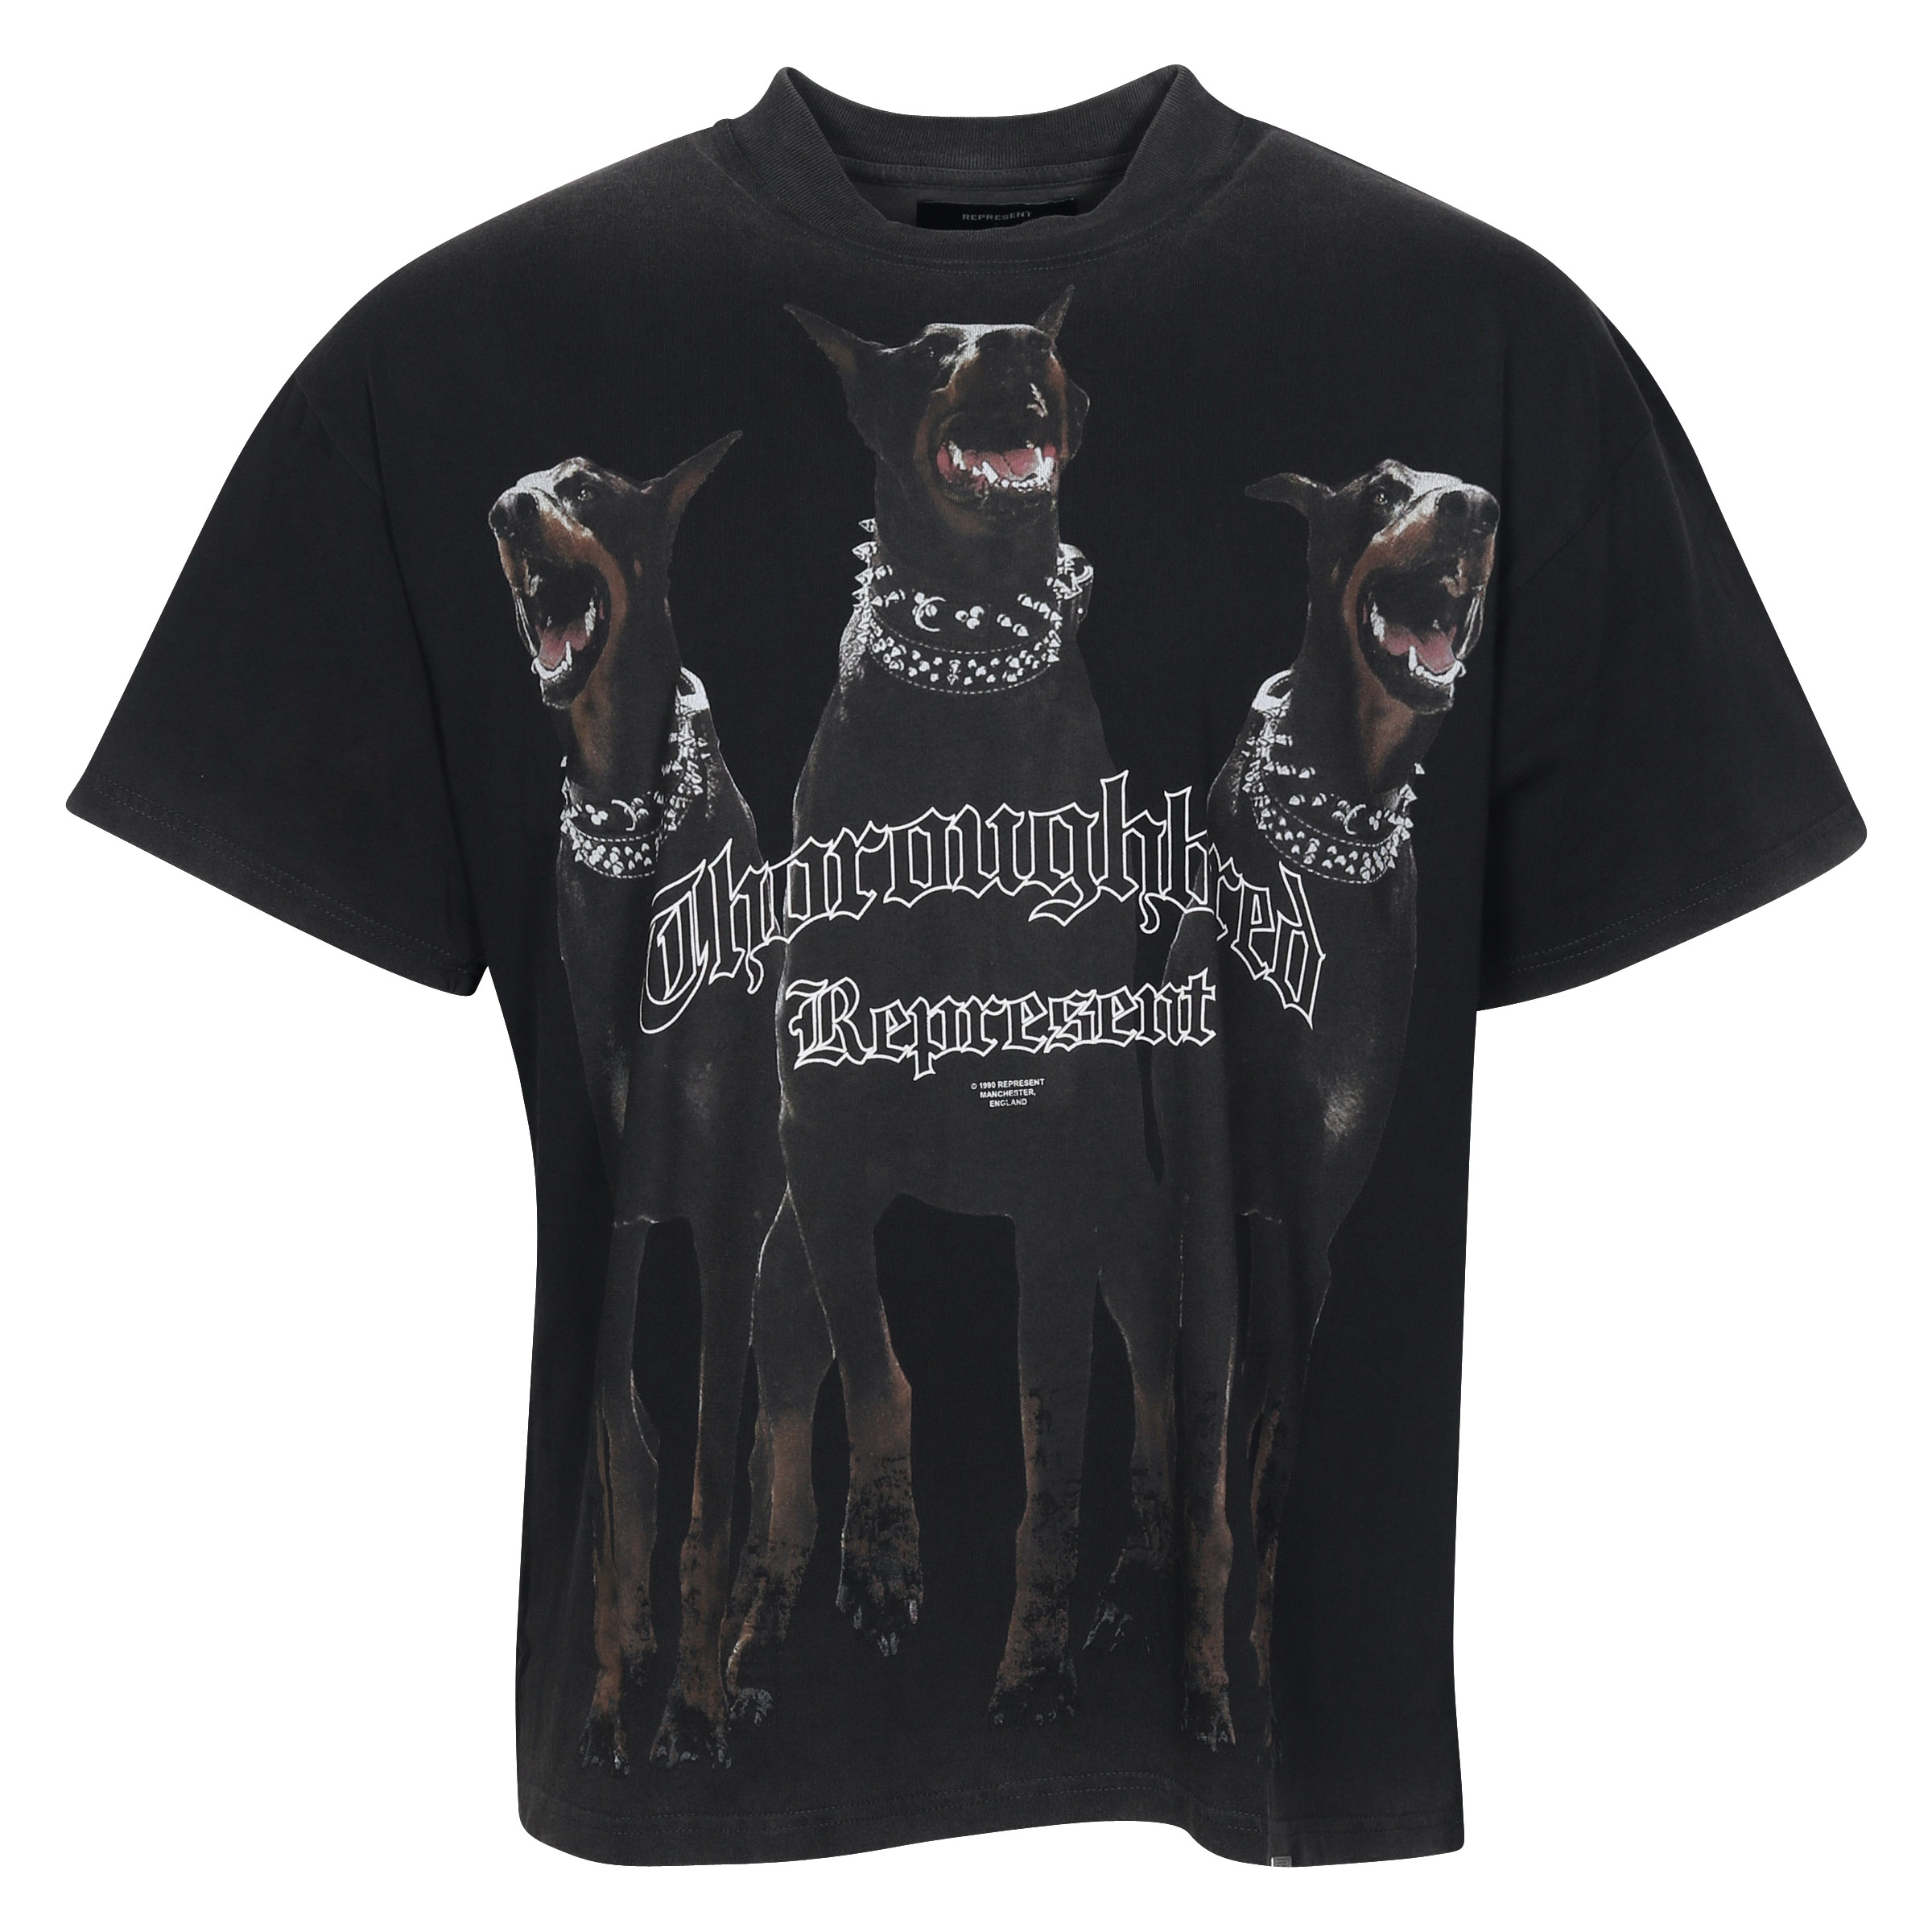 Represent Thoroughbred T-Shirt in Vintage Black L